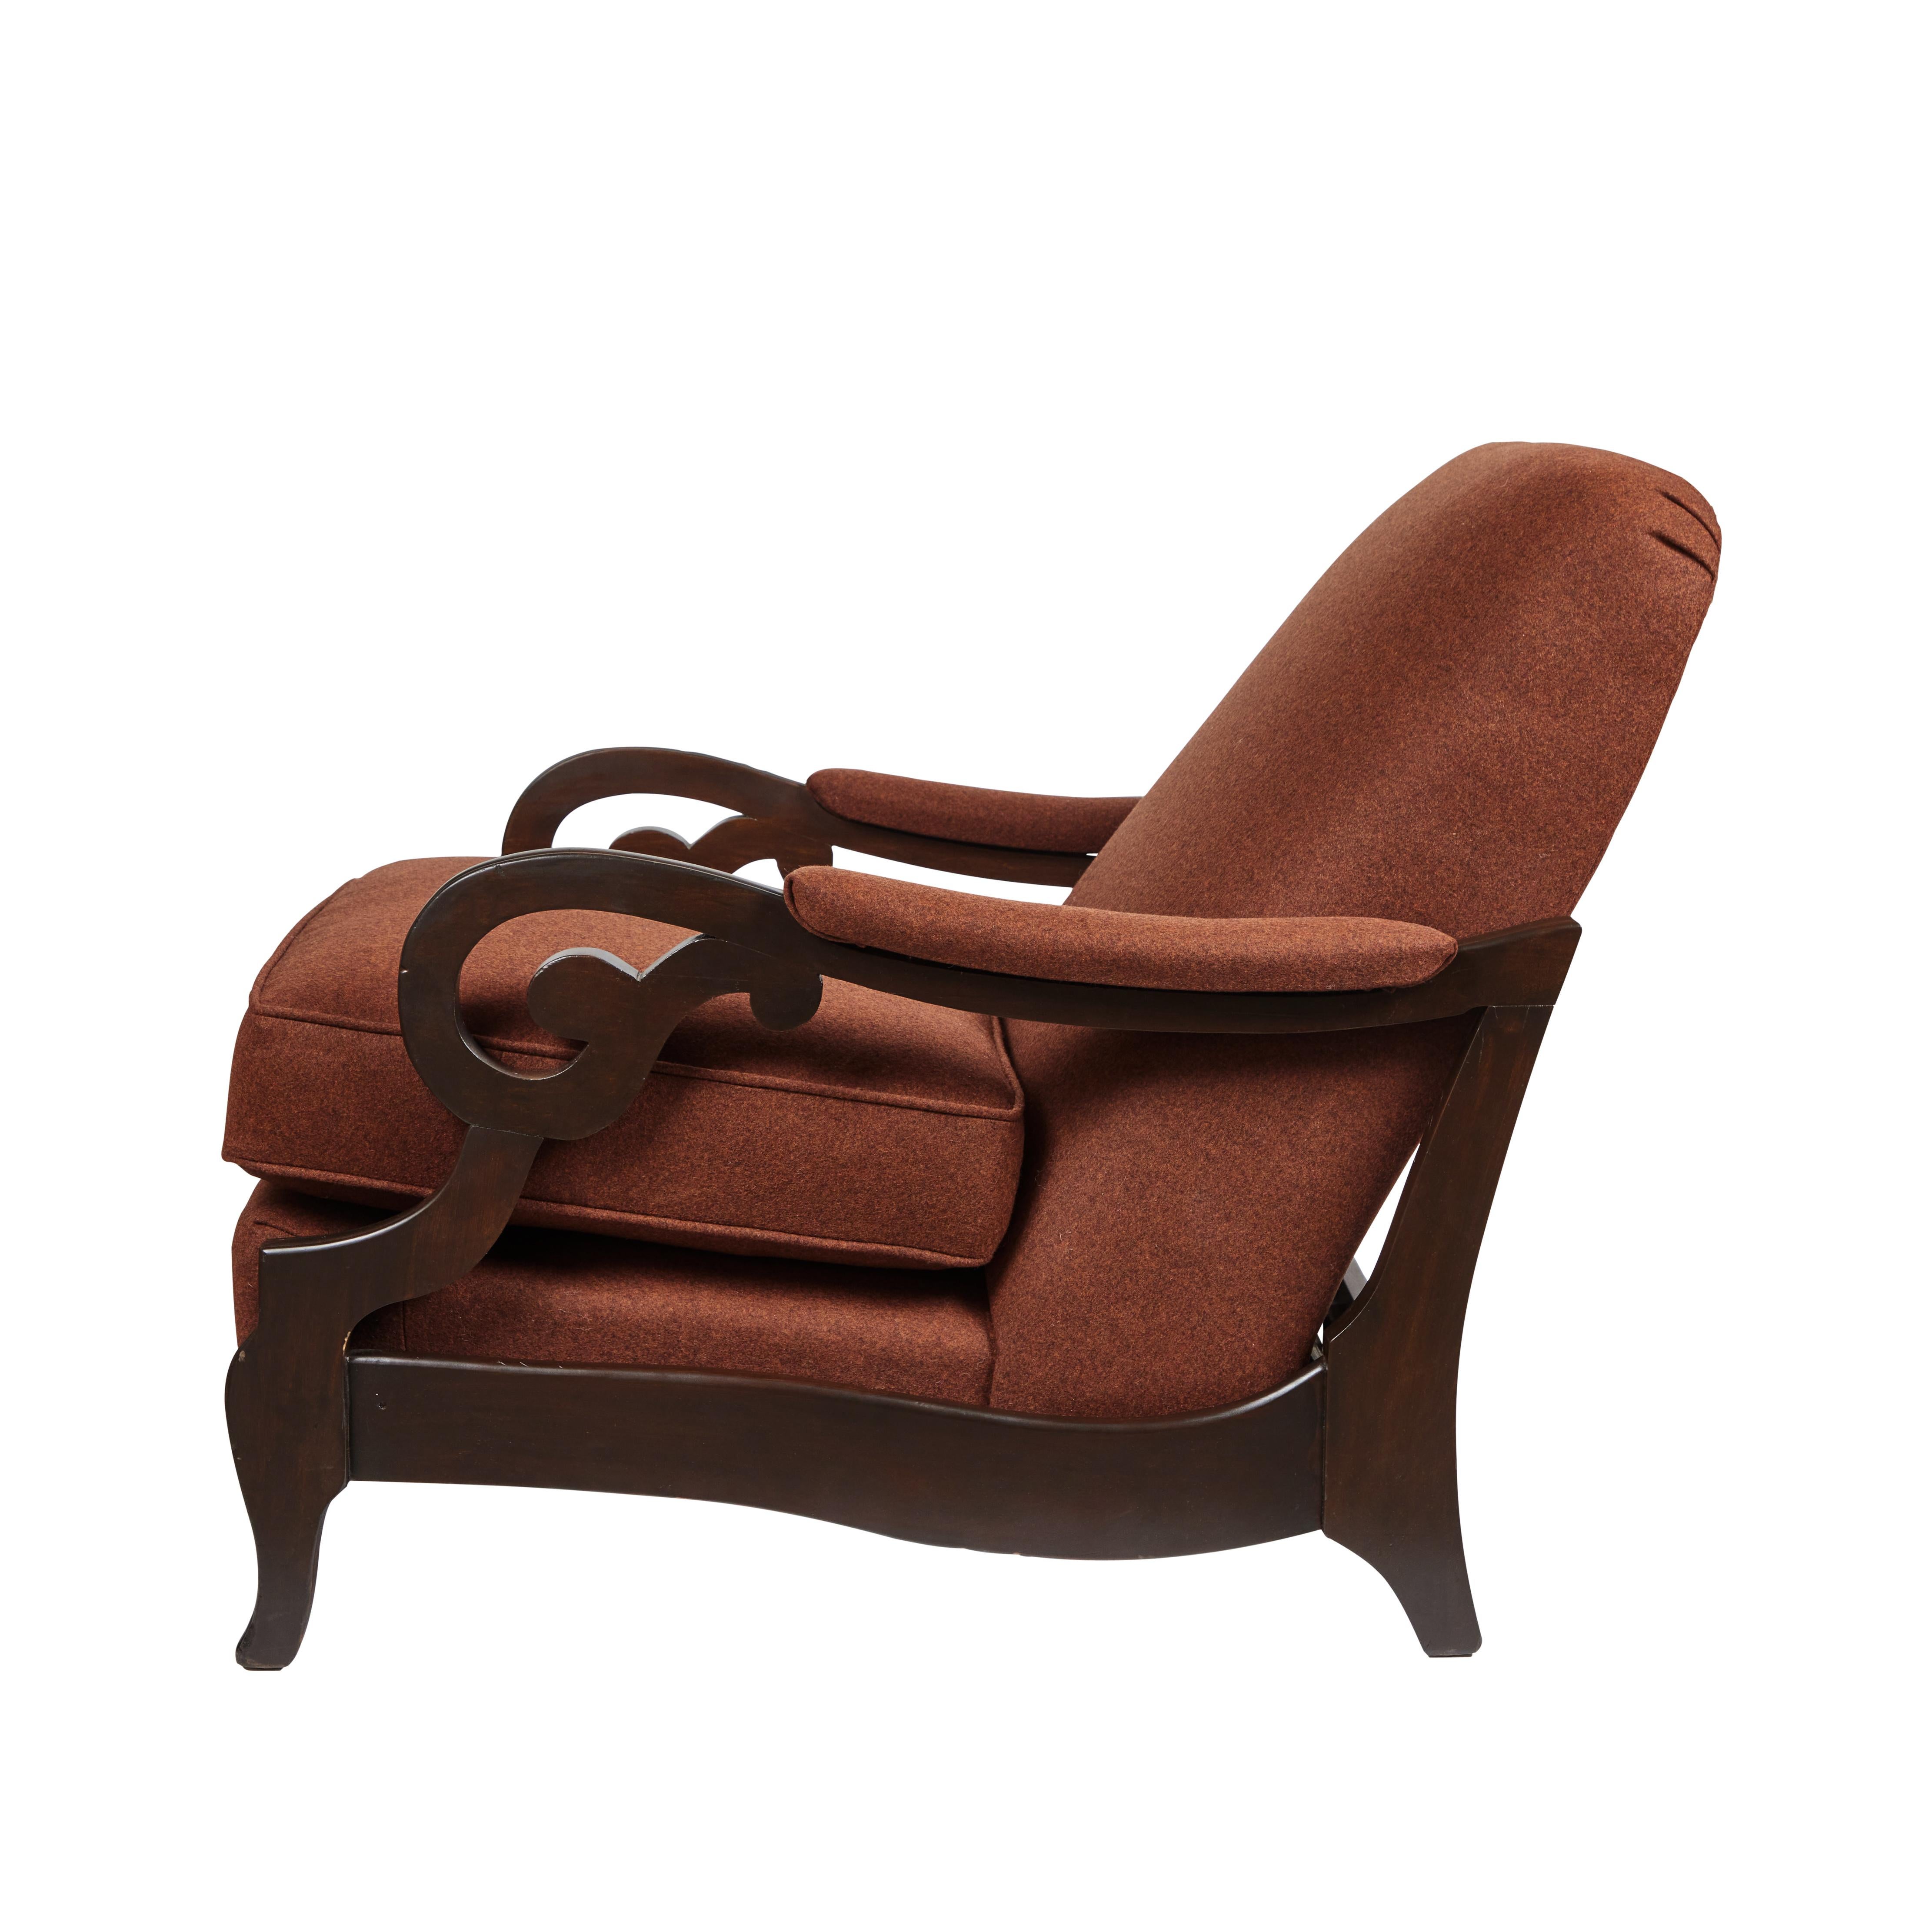 1940's Lounge Chair with  Footstool in Italian Wool  Felt In Good Condition For Sale In Pasadena, CA